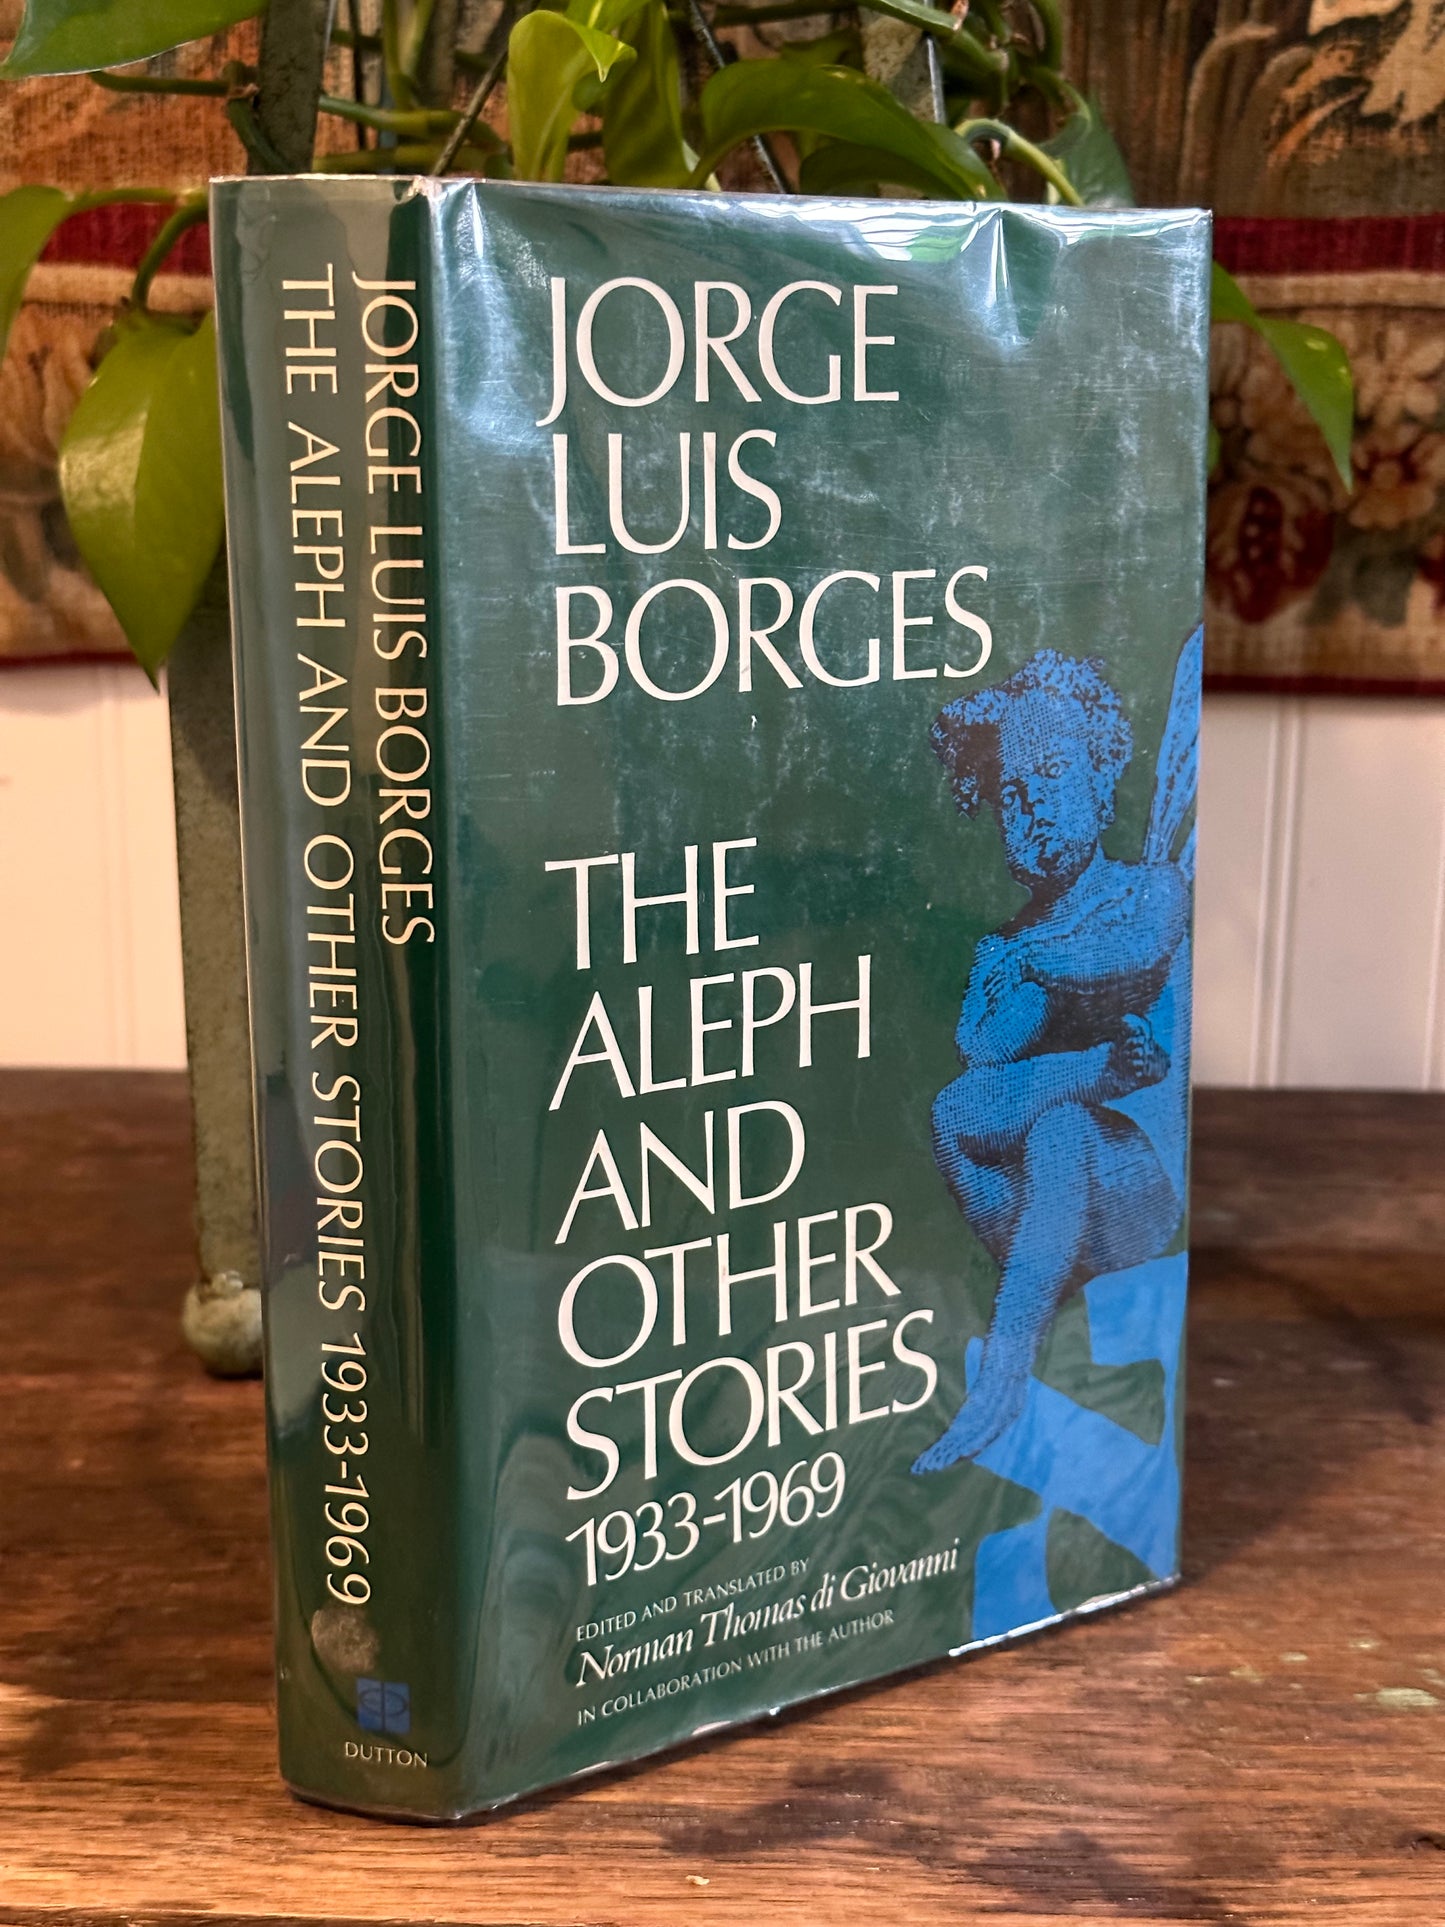 The Aleph and Other Stories by Jorge Luis Borges